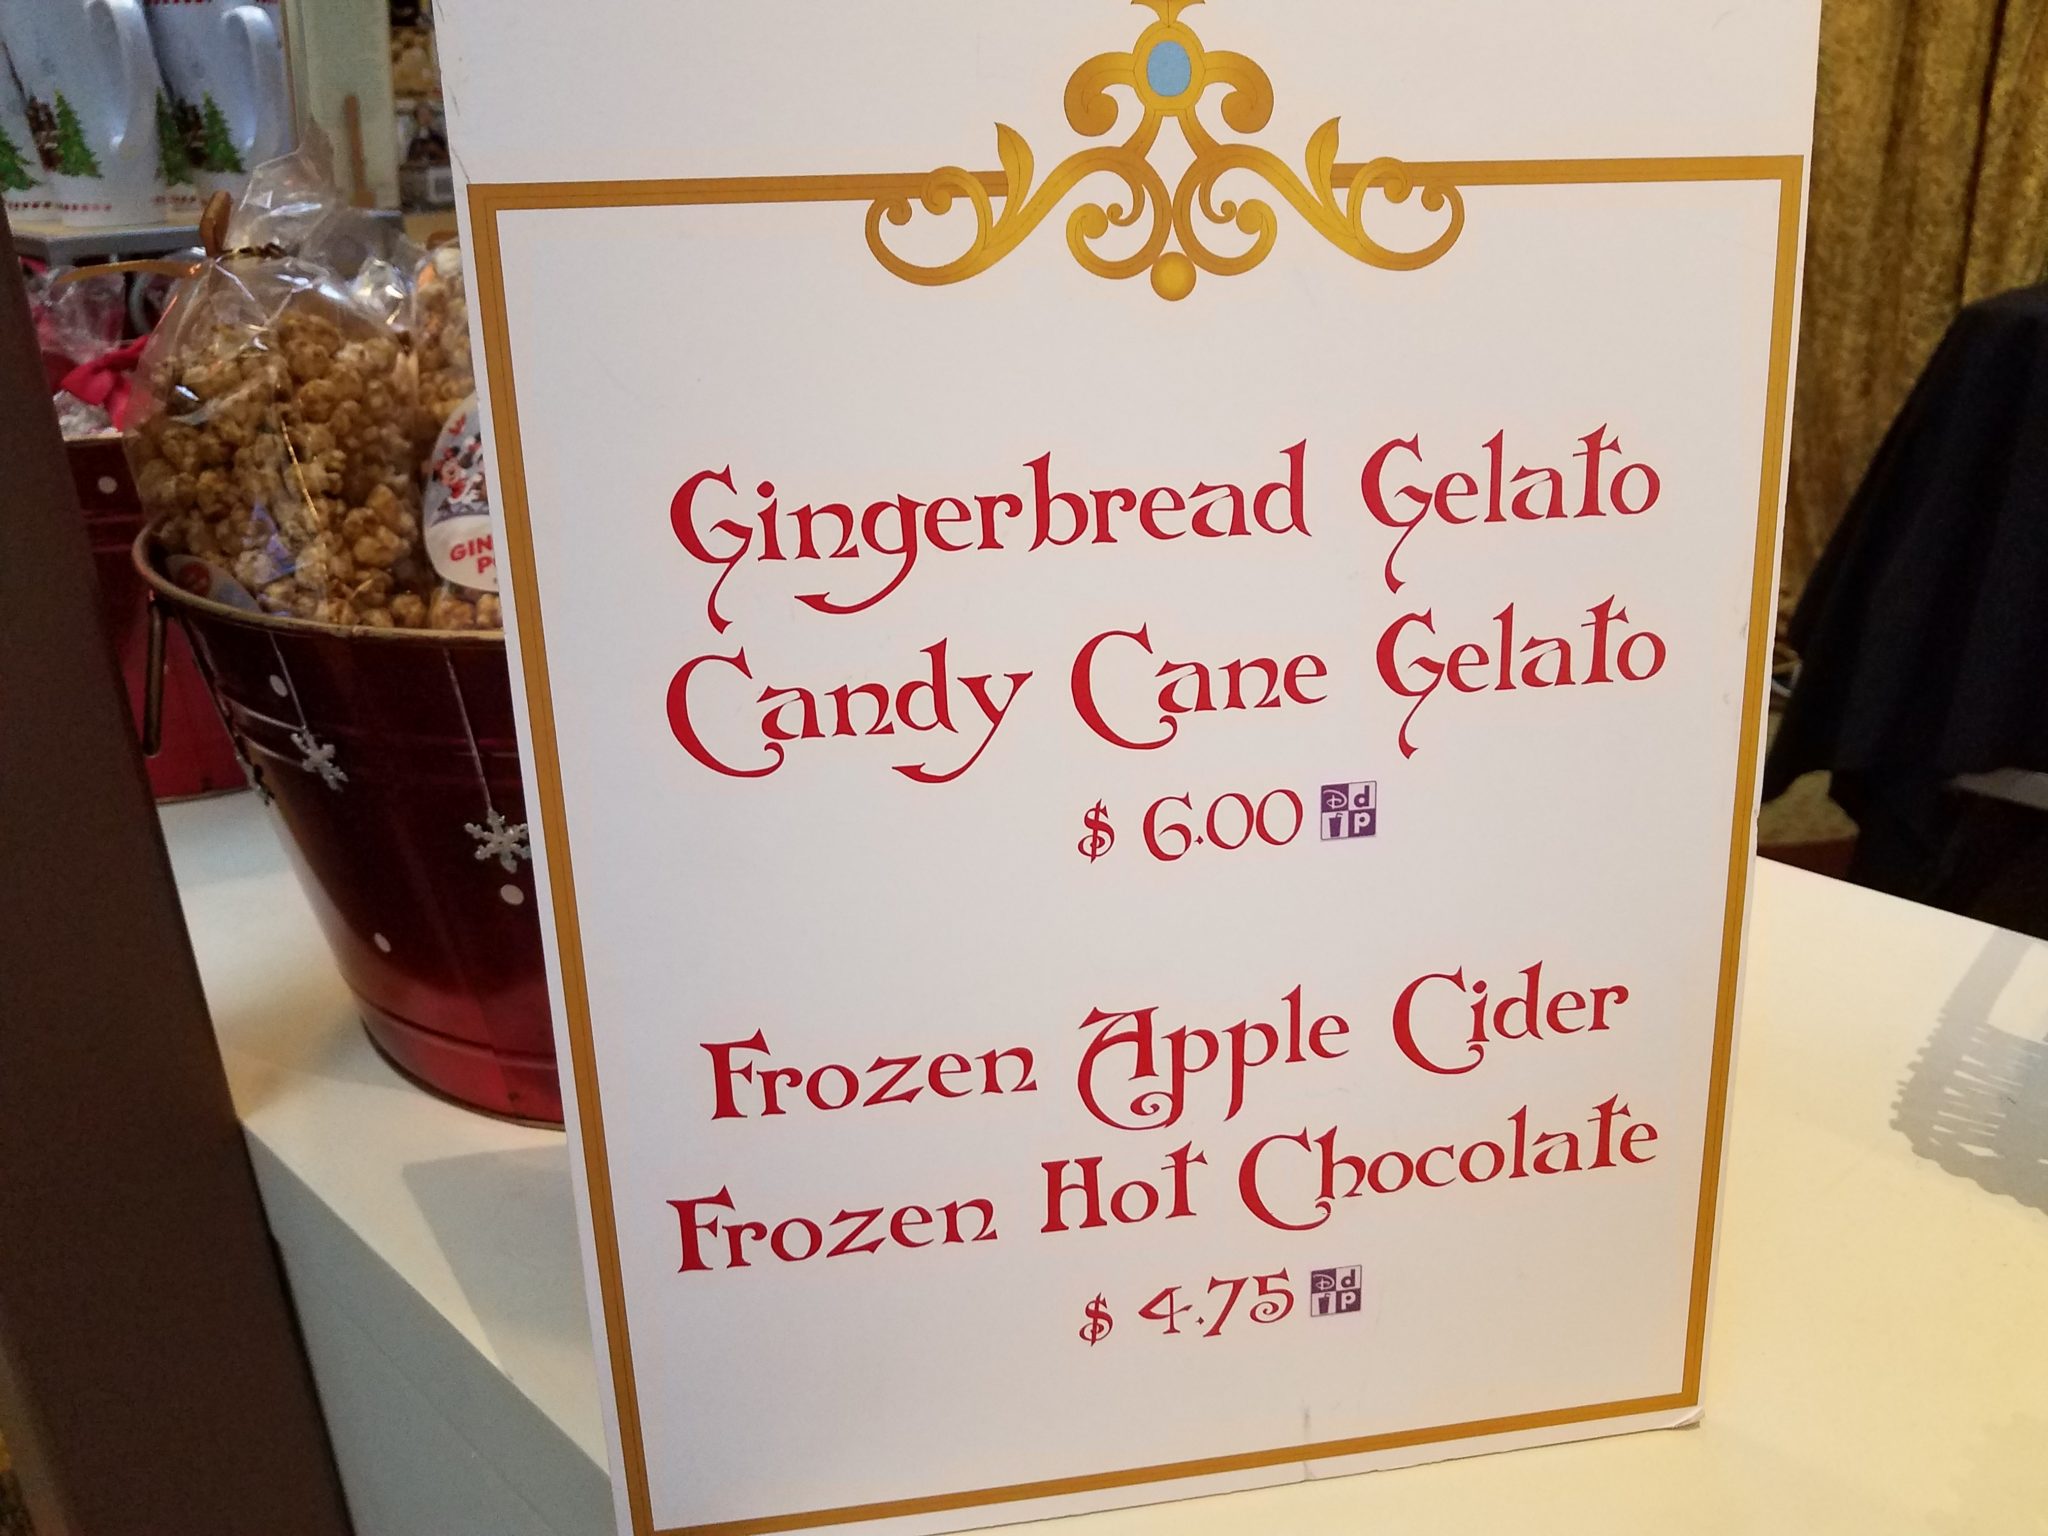 Sweet Holiday Treats Available at The Contemporary Resort